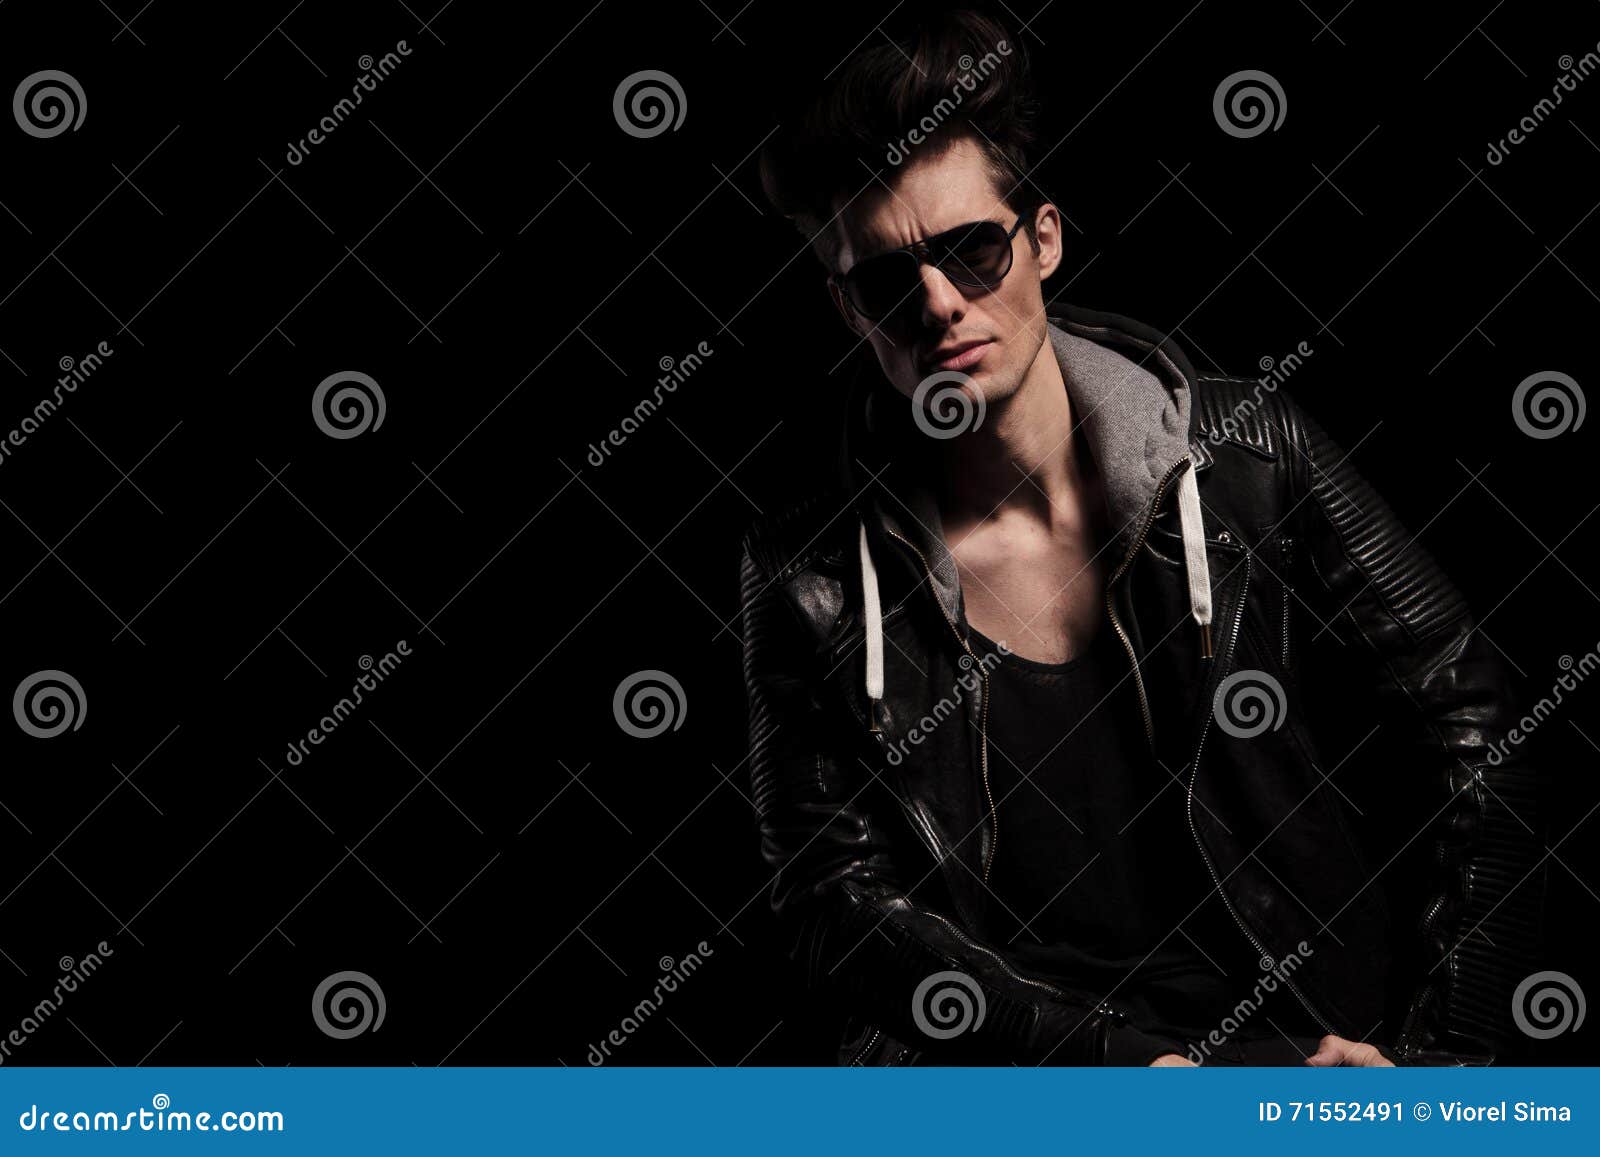 Portrait of an Attractive Man in Leather Jacket Stock Image - Image of ...